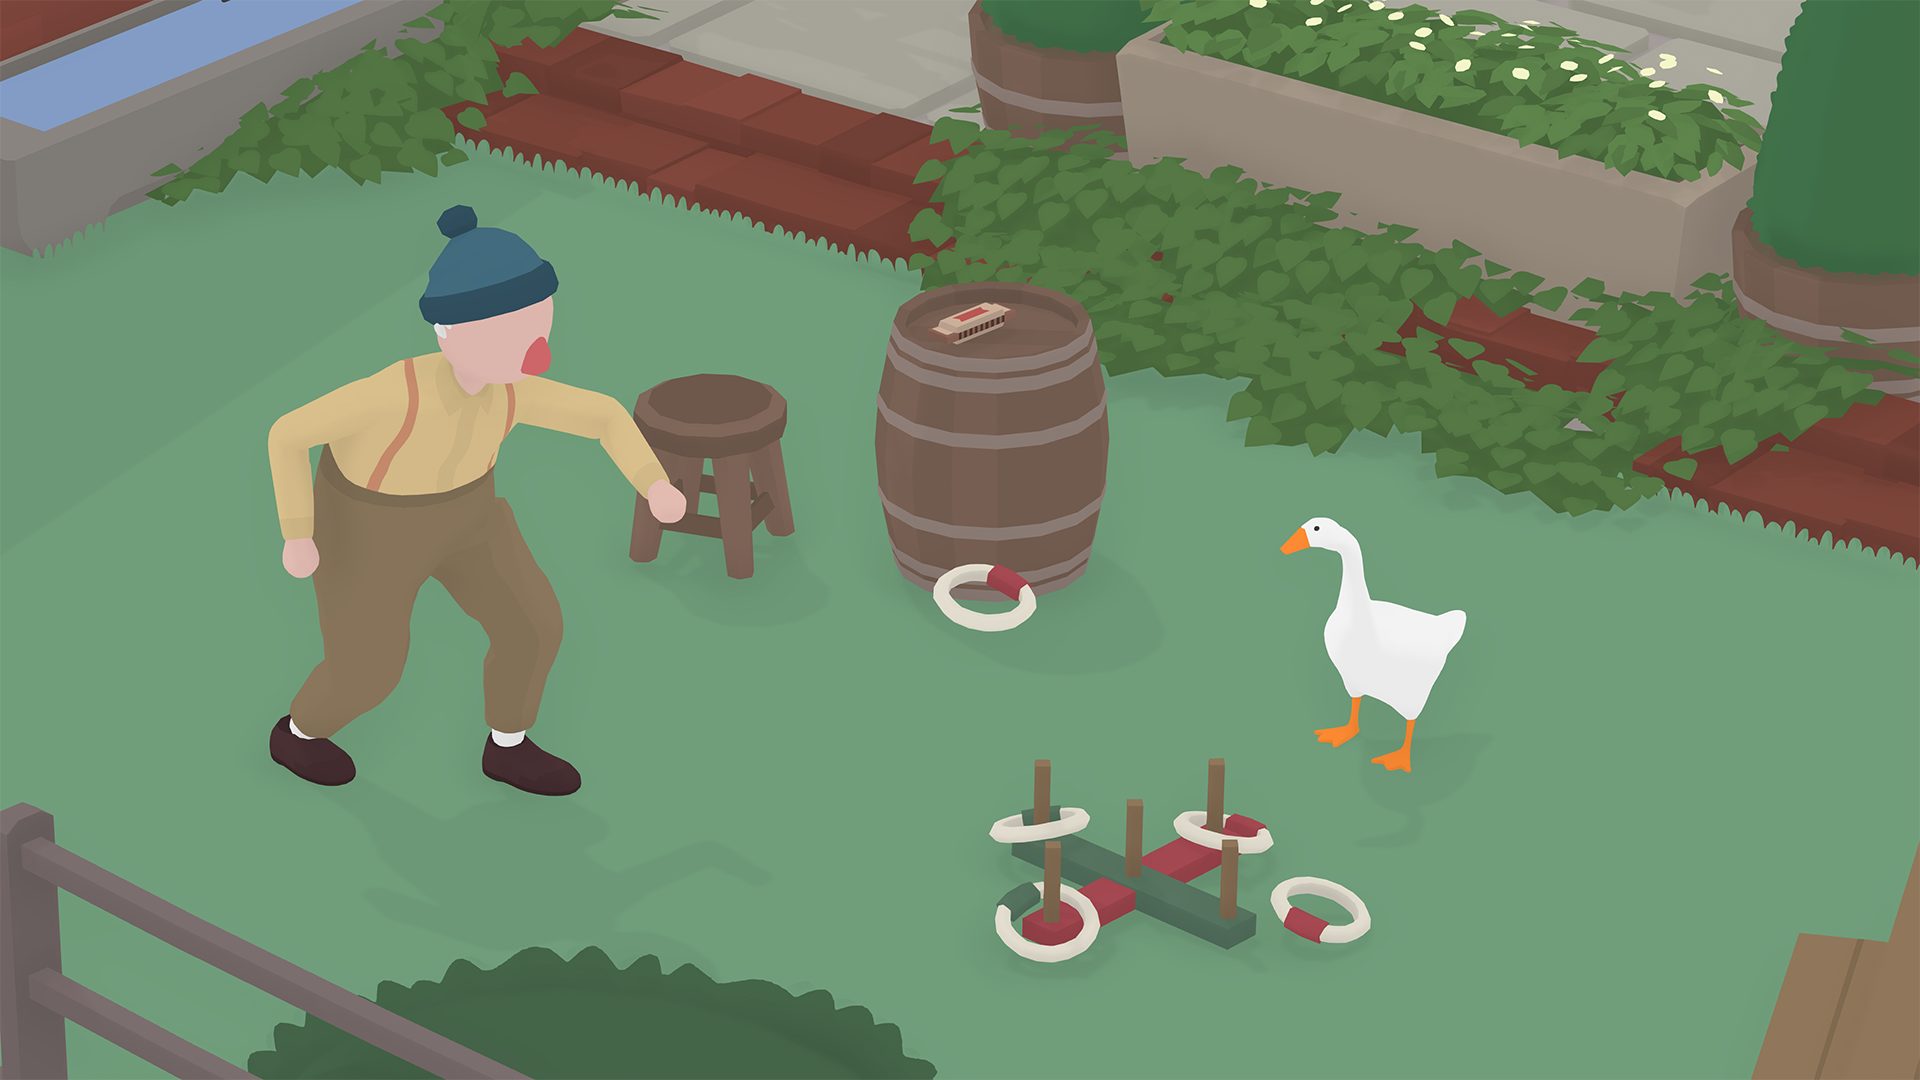 Game Theory: Can a Goose DESTROY YOUR LIFE? (Untitled Goose Game